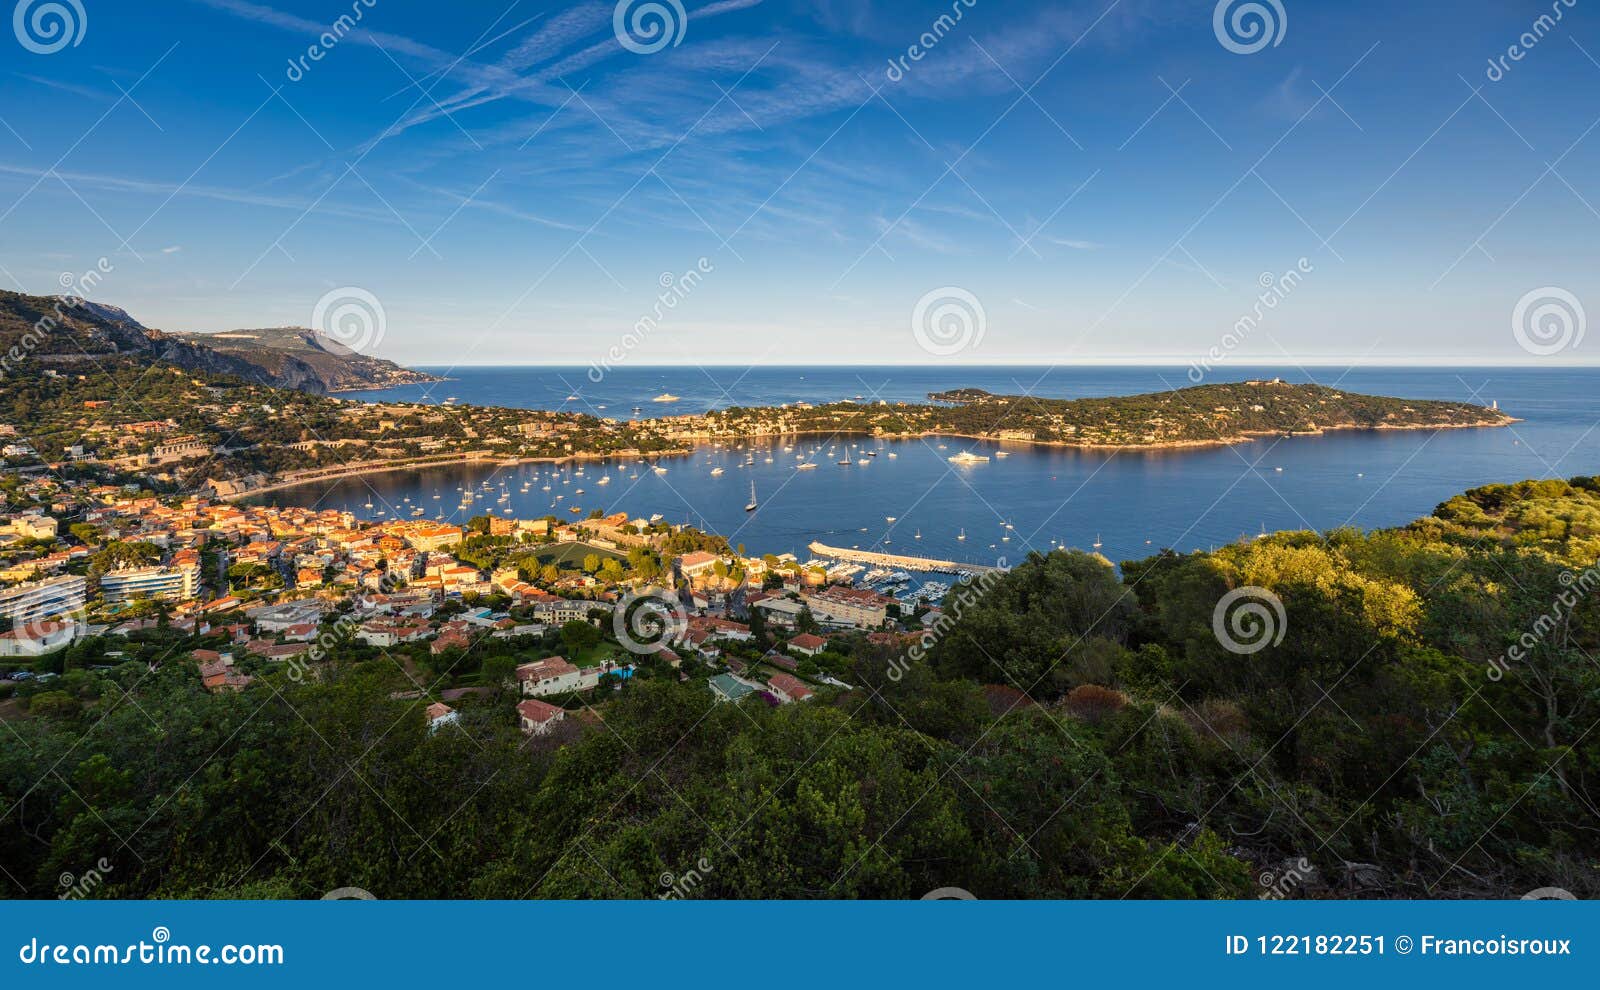 villefranche-sur-mer and saint-jean-cap-ferrat in summer at sunset. french riviera, provence-alpes-cote-d`azur, france